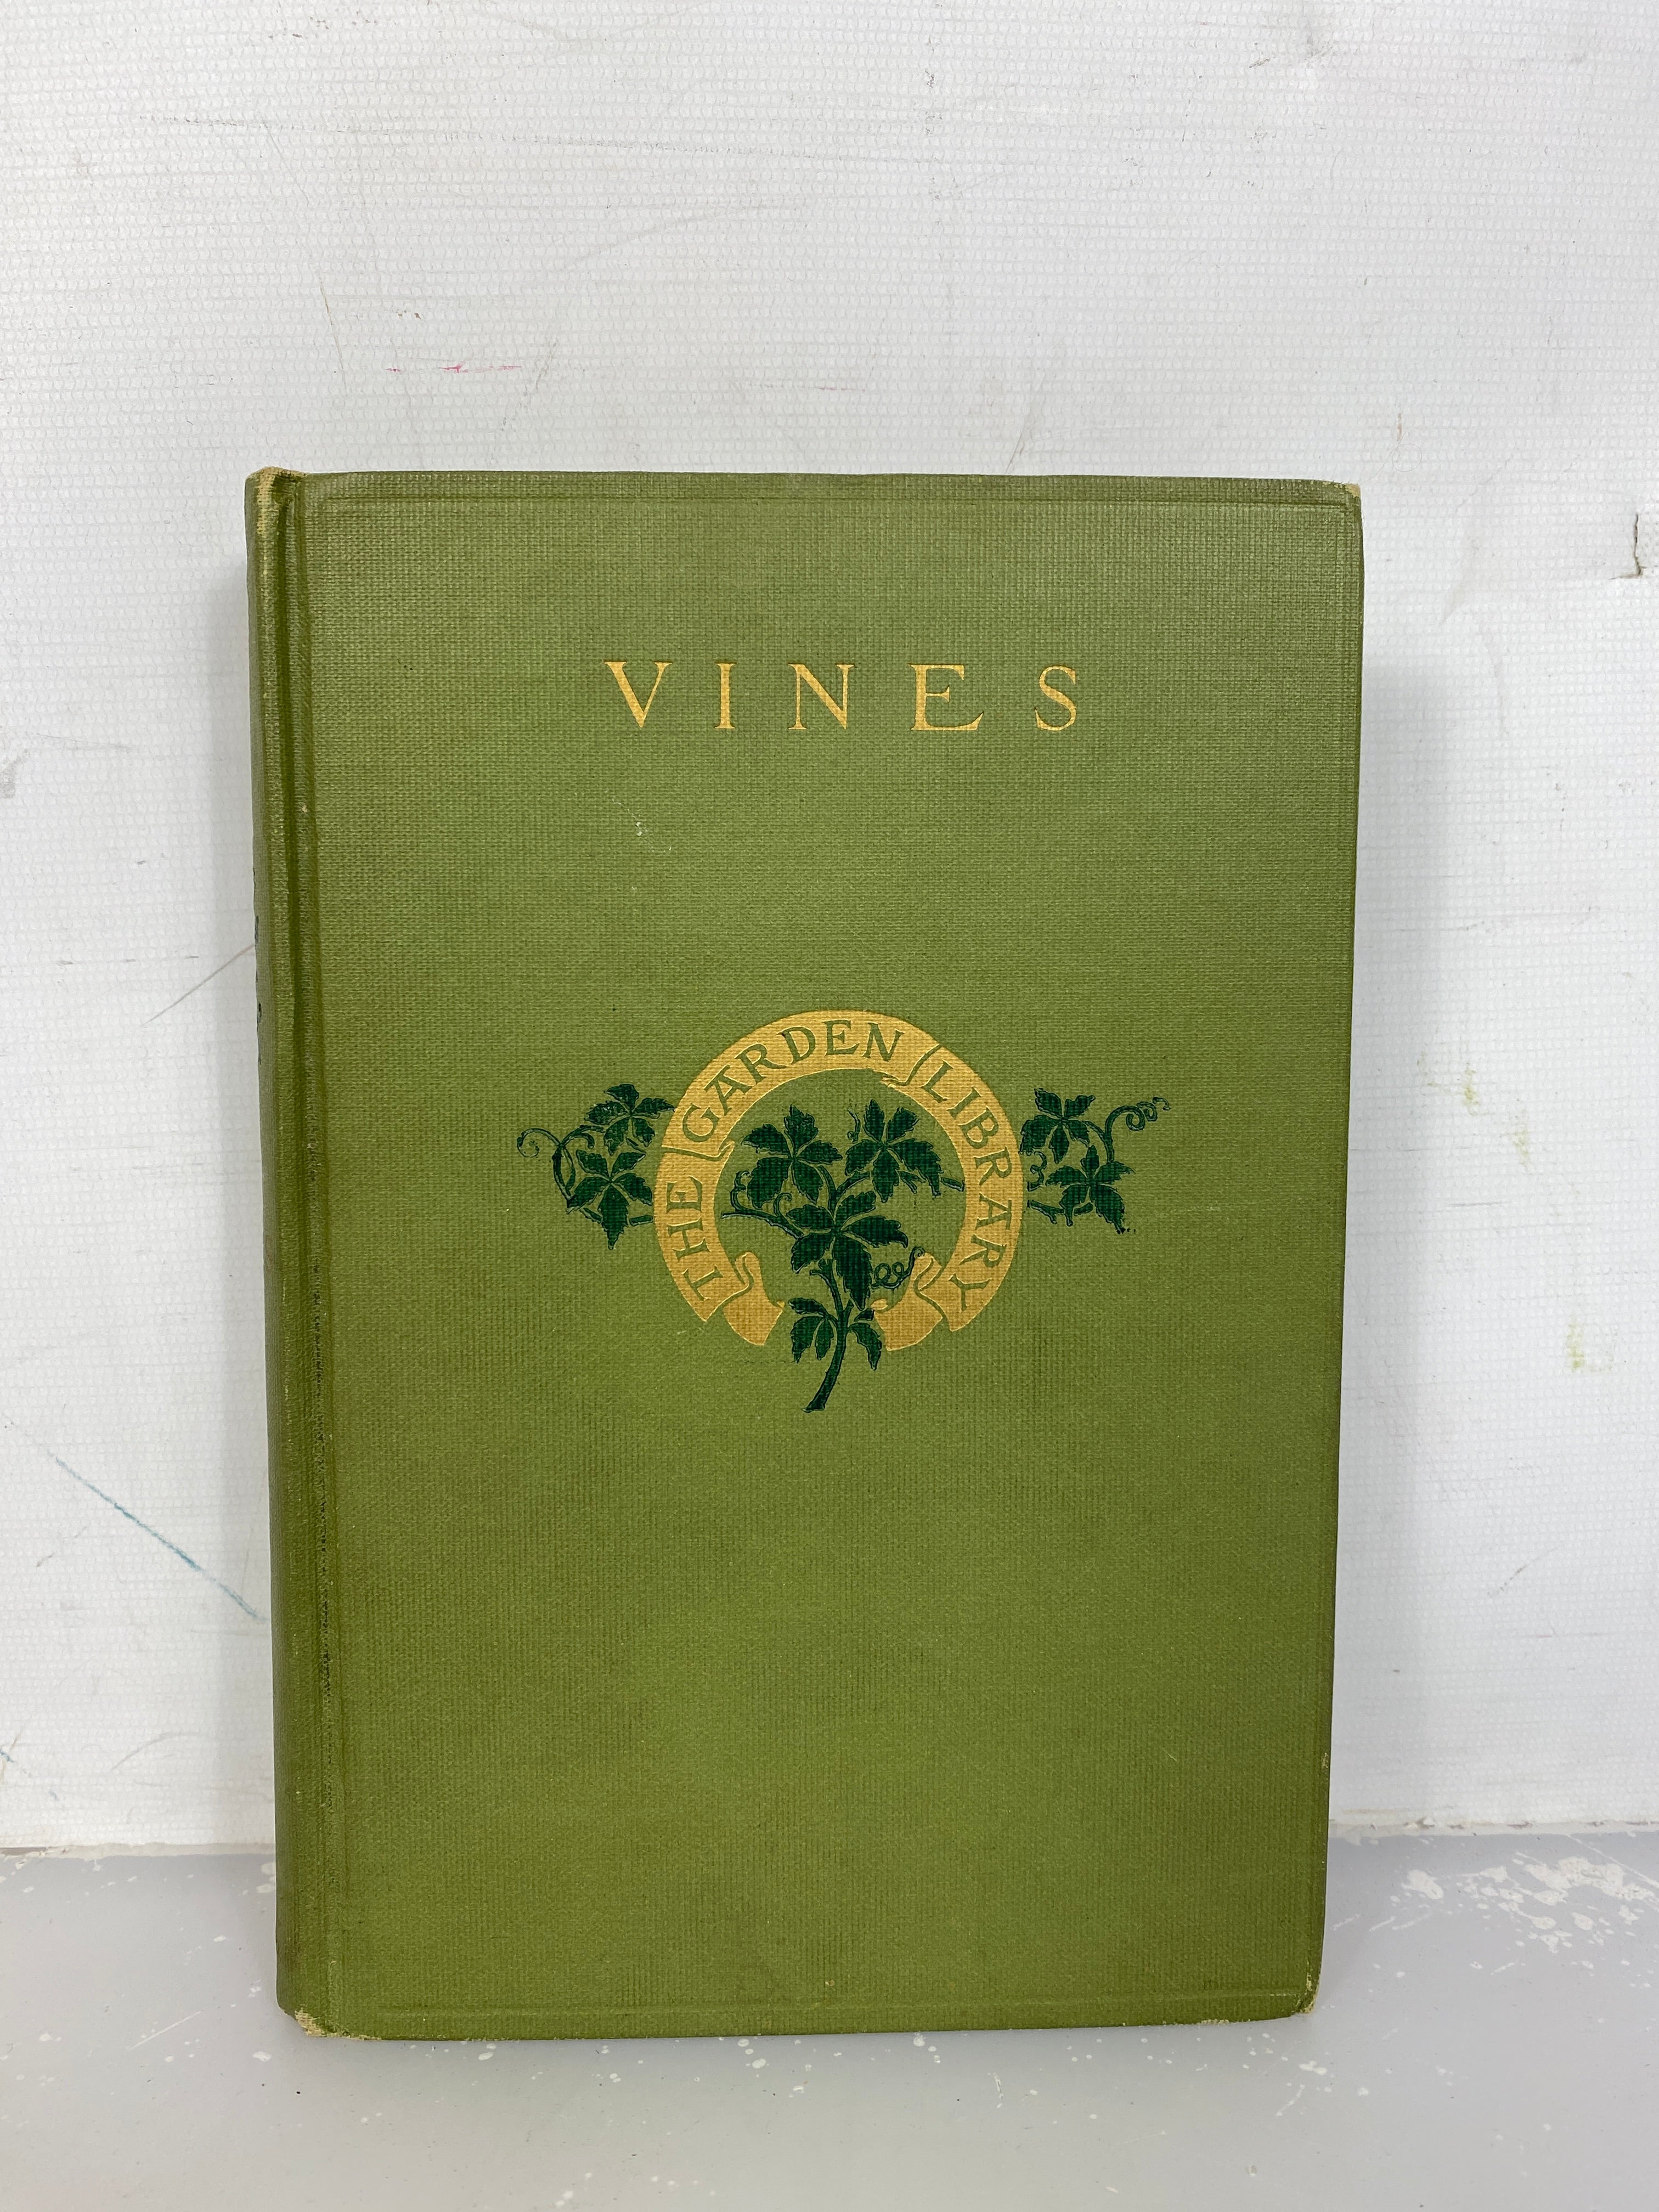 Antique Botany Book: Vines and How to Grow Them by William McCollom 1914 HC